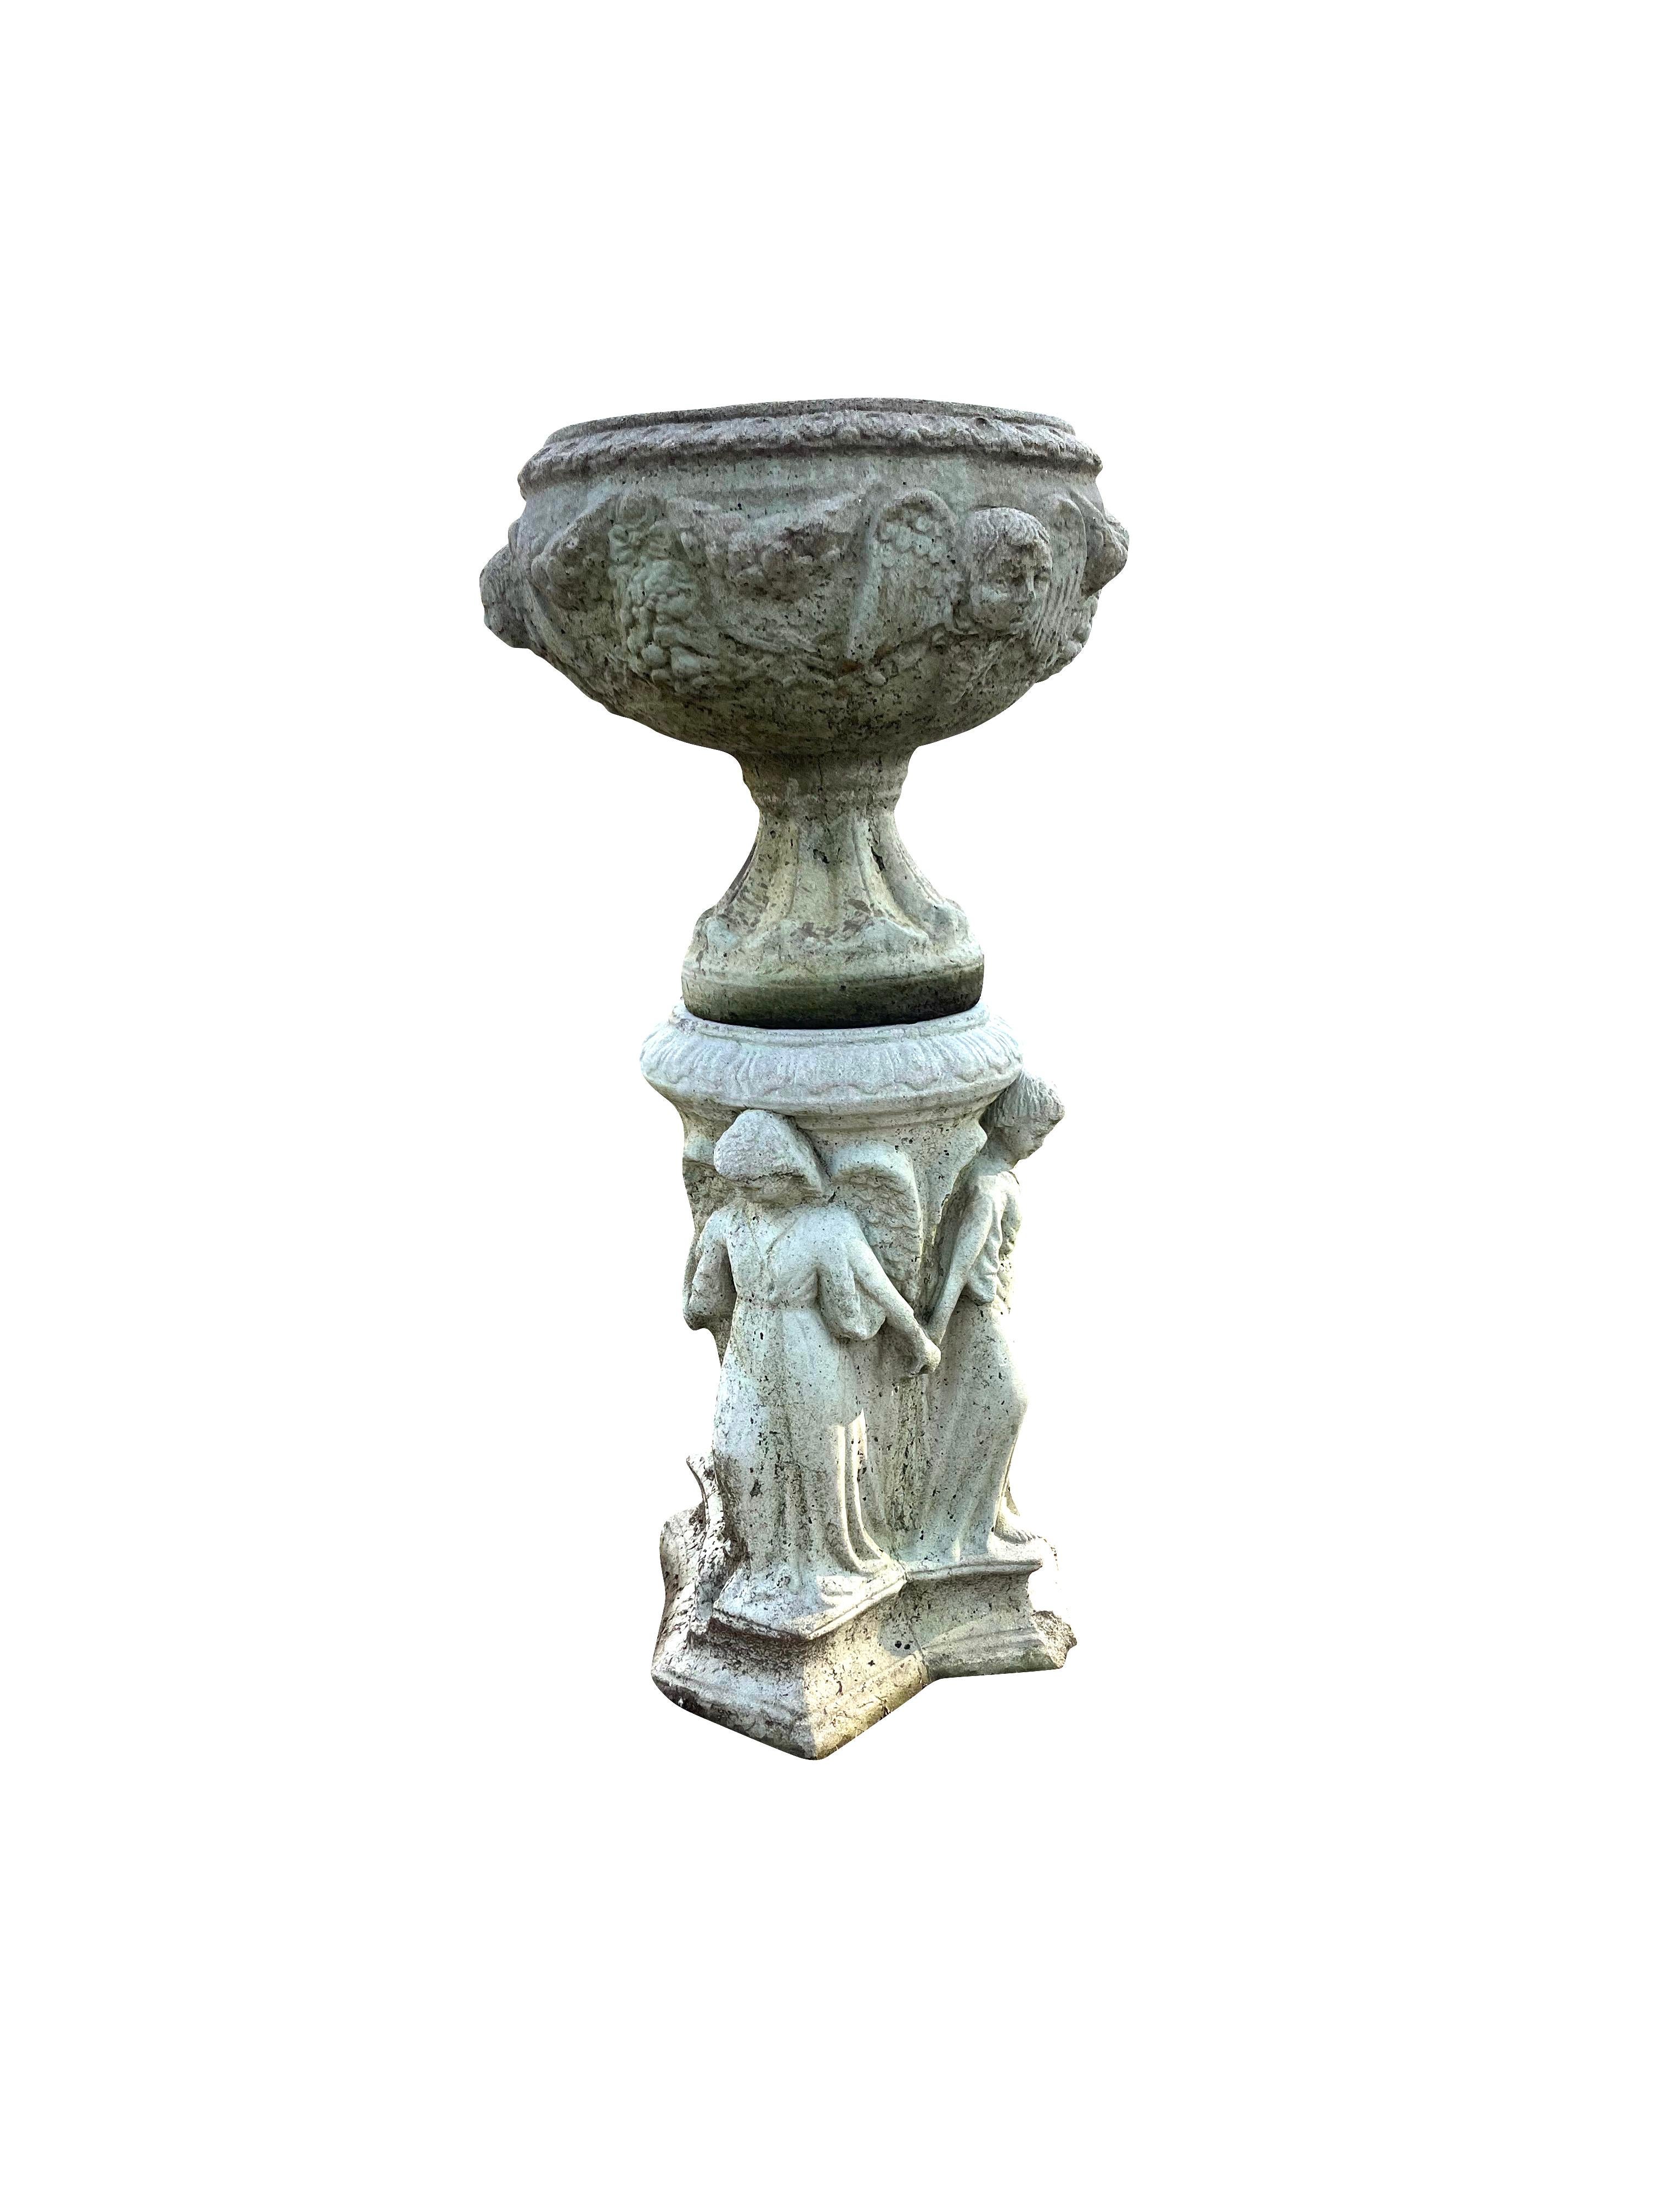 This font/ urn on a pedestal is two piece garden element consisting of a cement font on top decorated with angel or putti faces and garland on a footed pedestal base. The font/ birdbath/ planter sits on a cement base surrounded by figures of angels